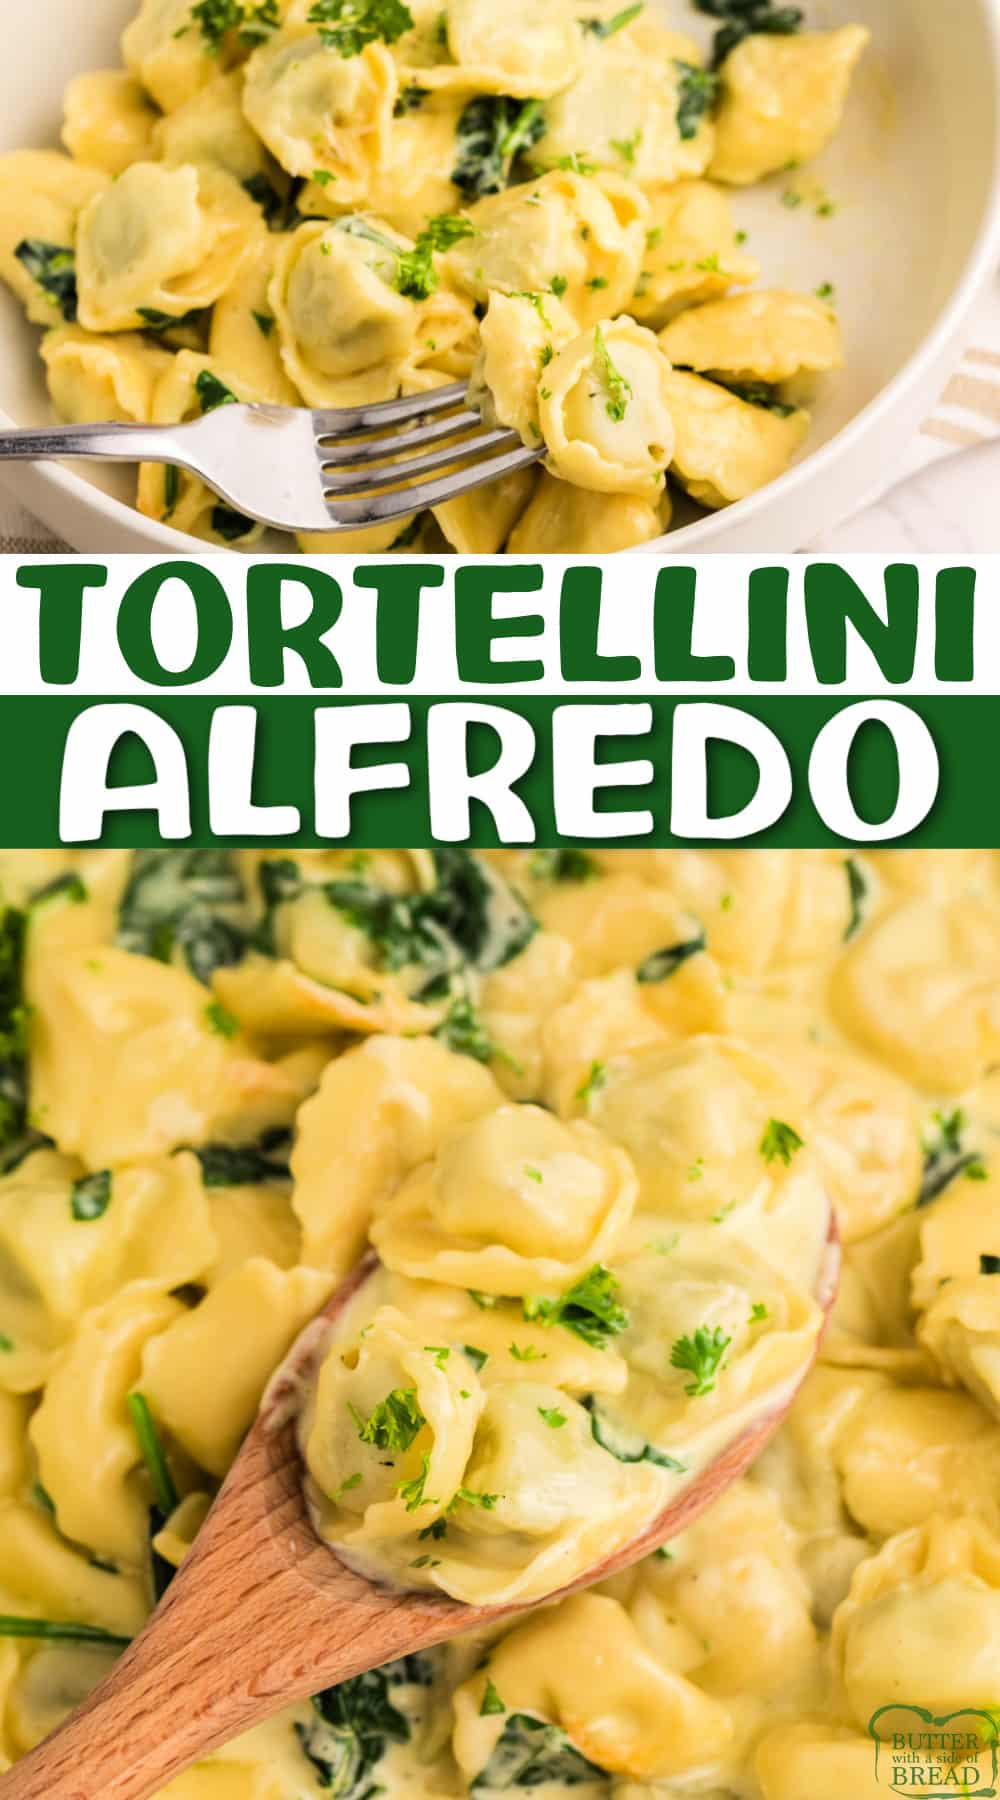 Tortellini Alfredo is deliciously creamy, with flavors of garlic and parmesan cheese. This indulgent pasta dish is perfect for an easy dinner recipe that the whole family will love. 